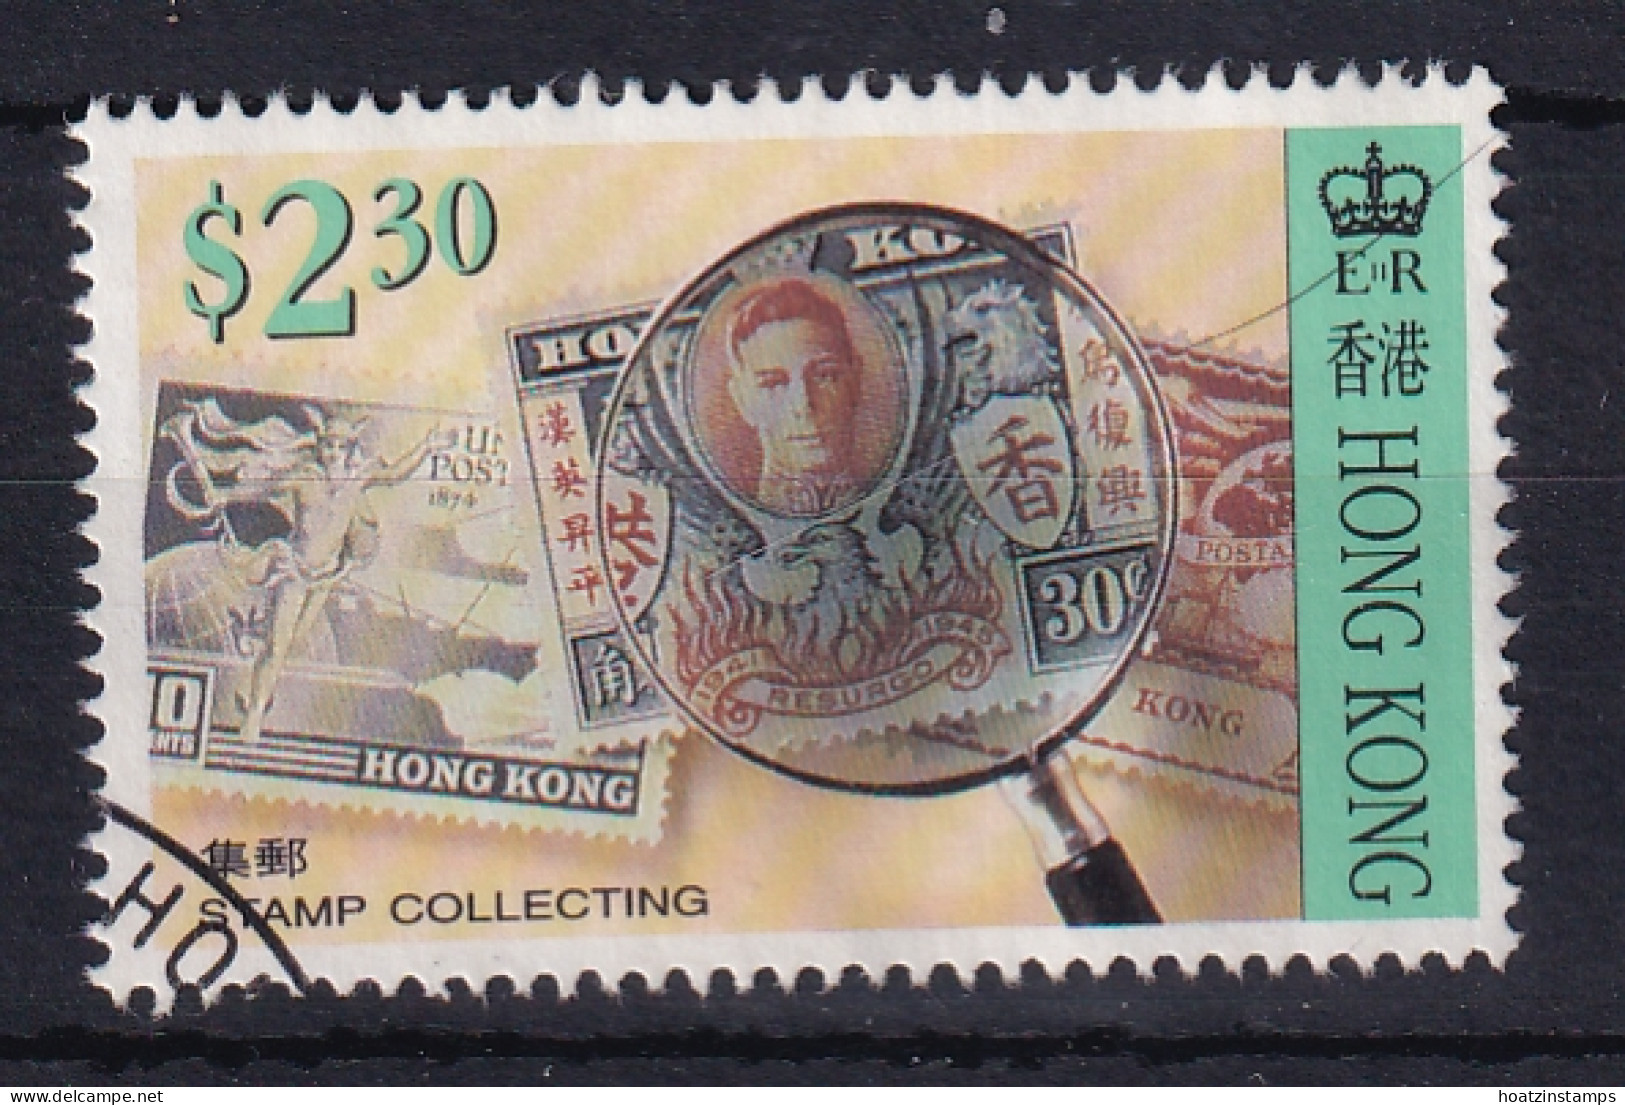 Hong Kong: 1992   Stamp Collecting   SG720    $2.30   Used  - Gebraucht